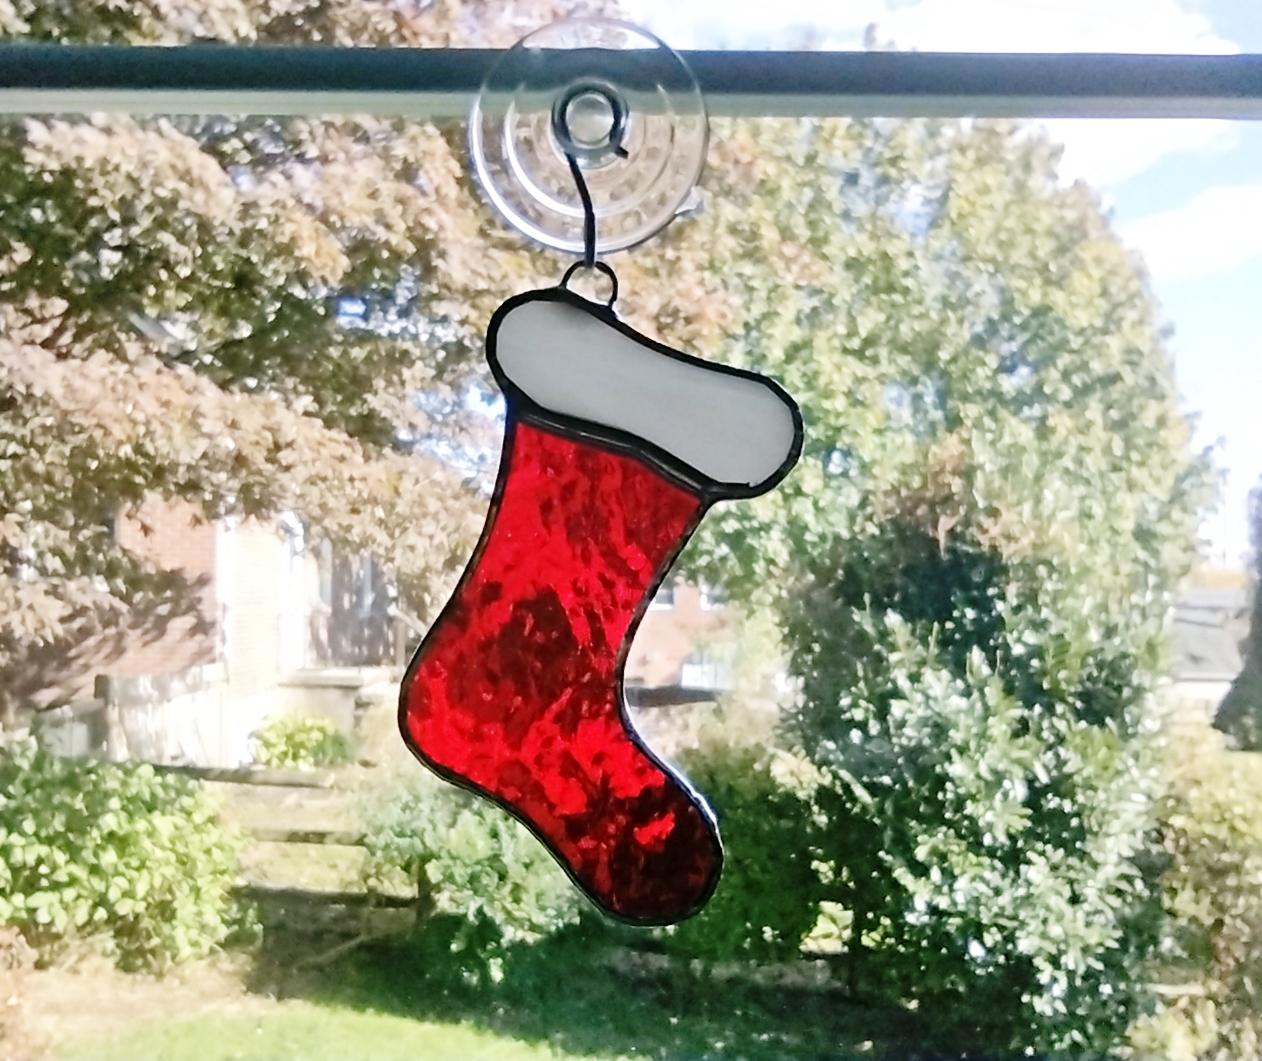 Stained Glass Christmas Stocking Ornament with Personalization Option